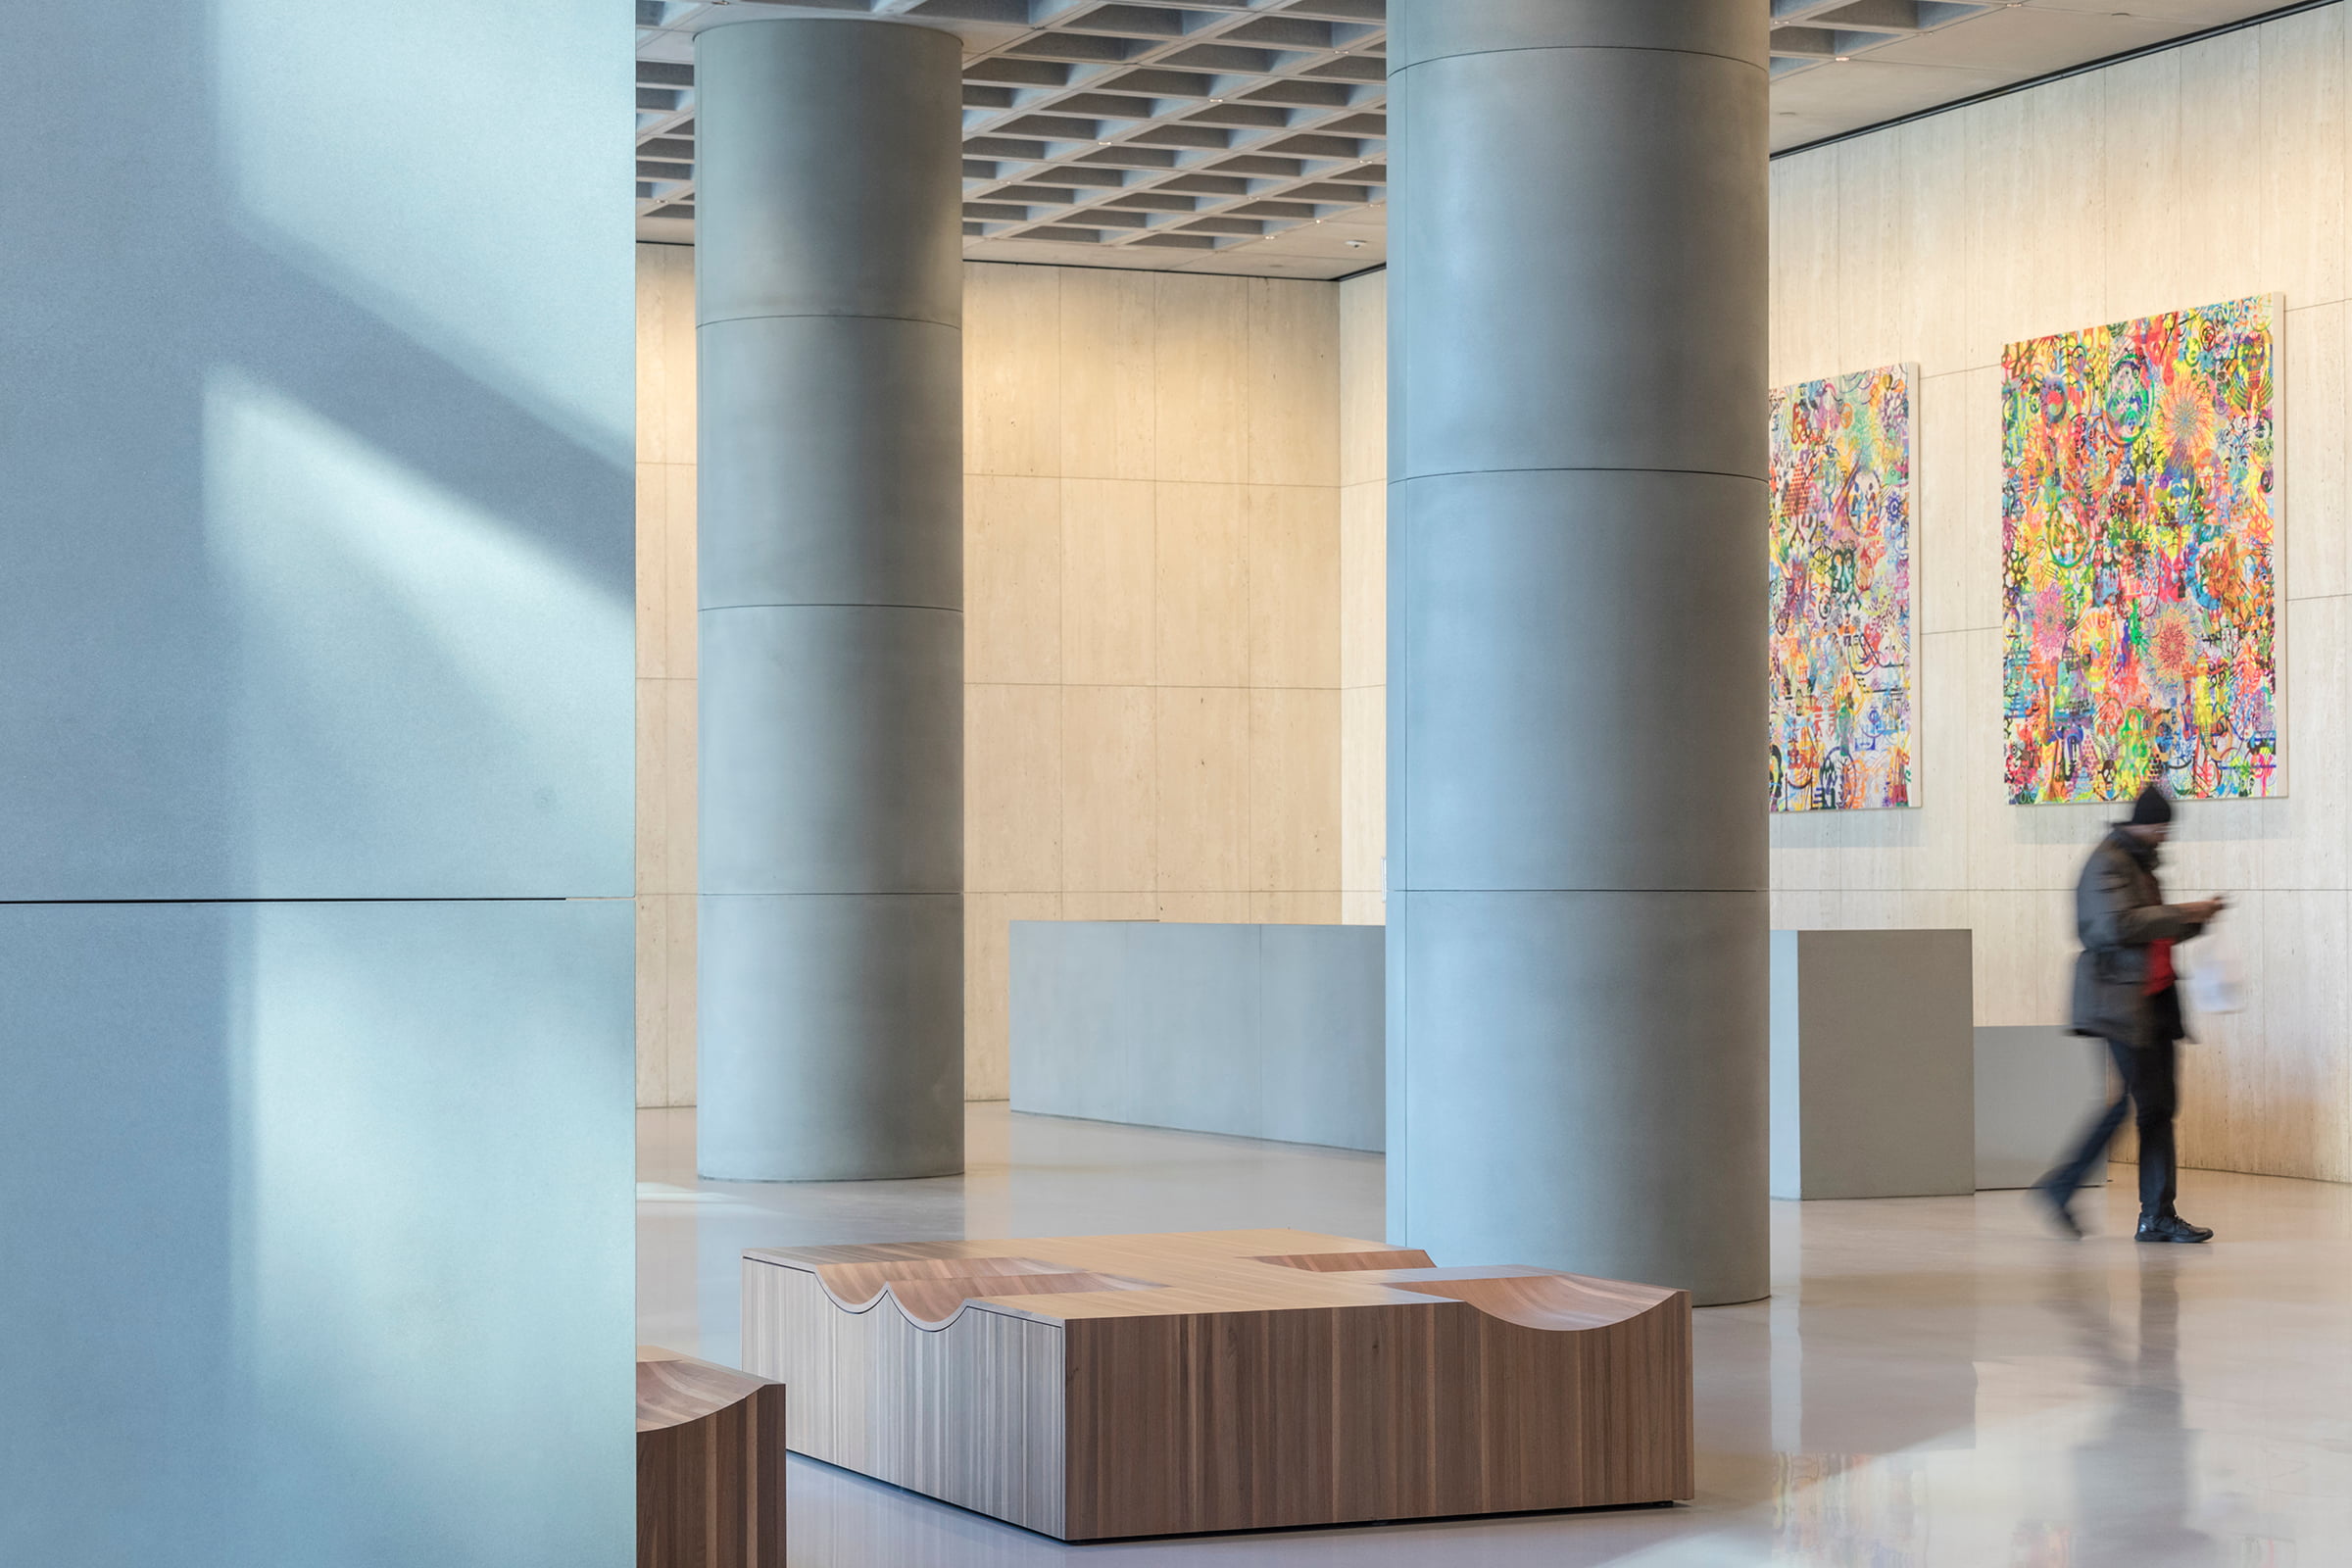 An image of the lobby with Ryan McGinness paintings.